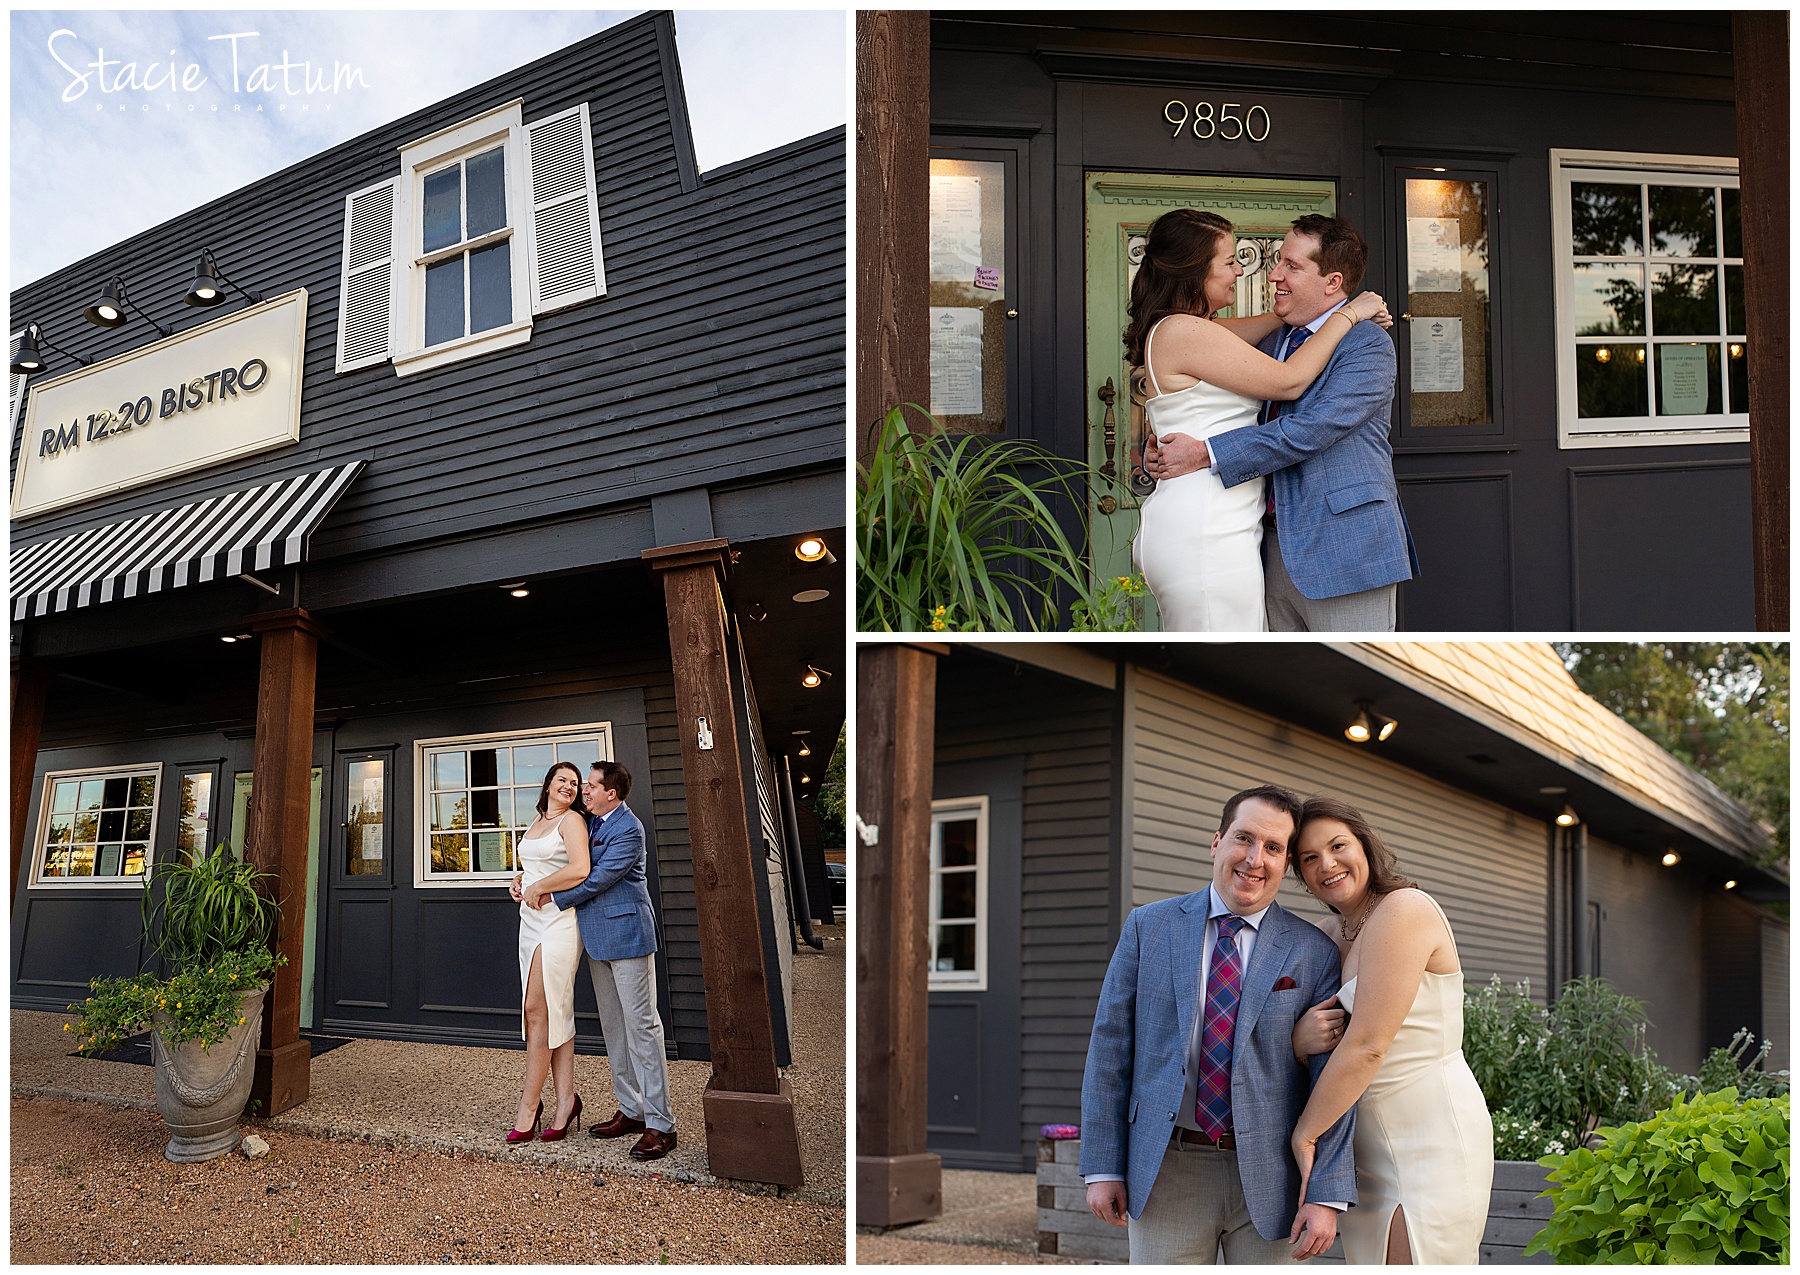 Dallas Engagement Photographer couple portraits in front of restaurant.jpg